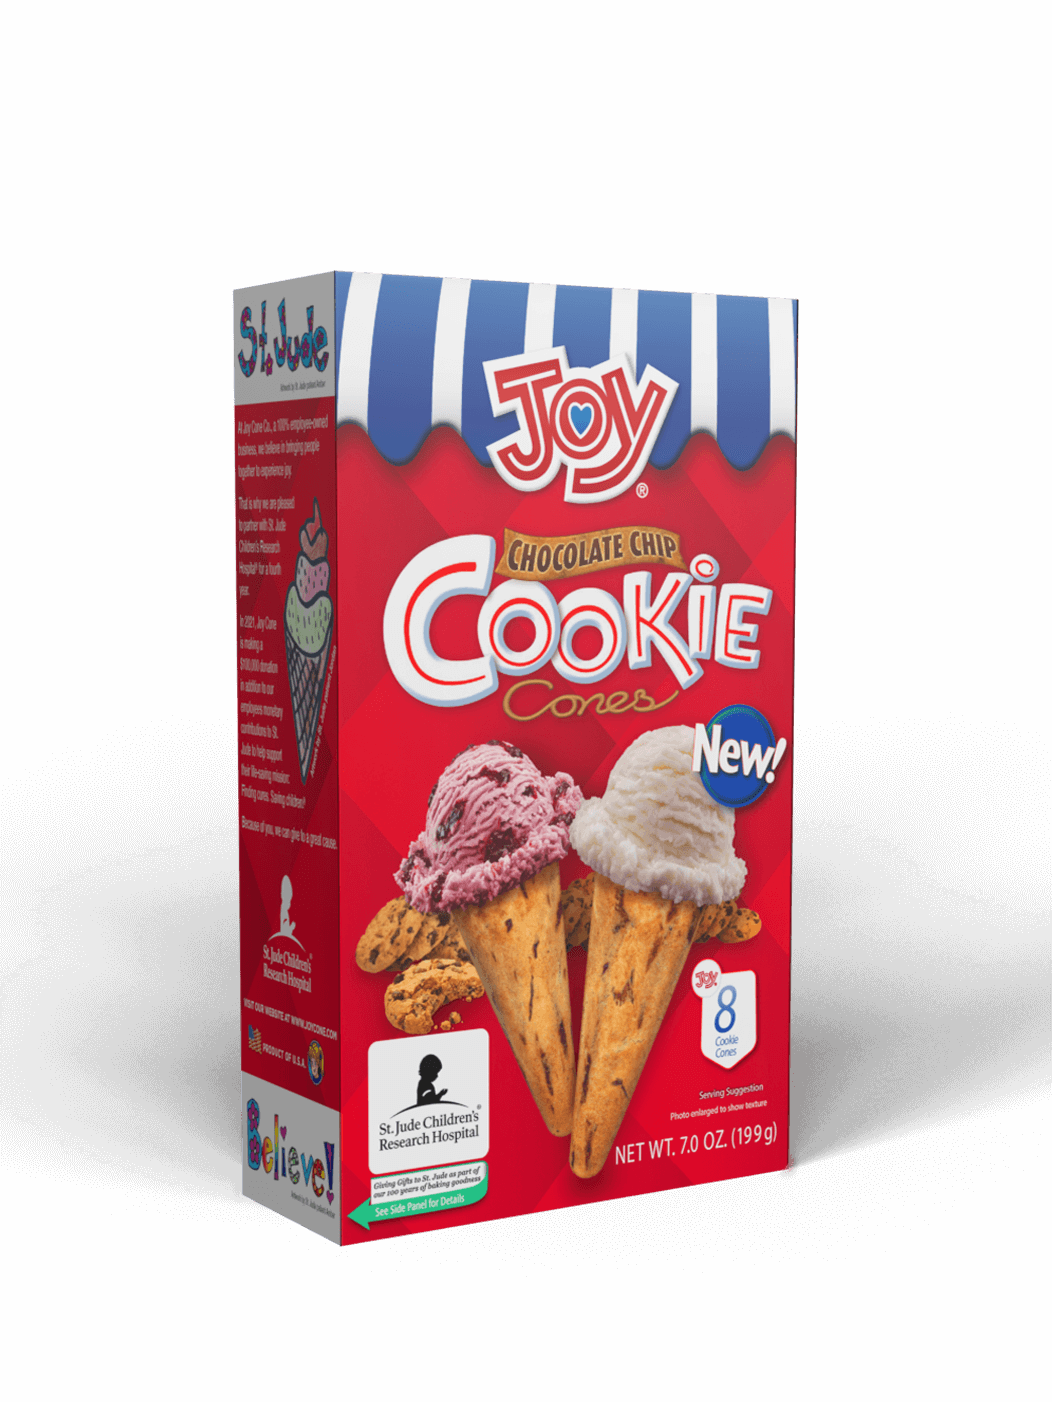 8CT. CHOCOLATE CHIP COOKIE CONES box